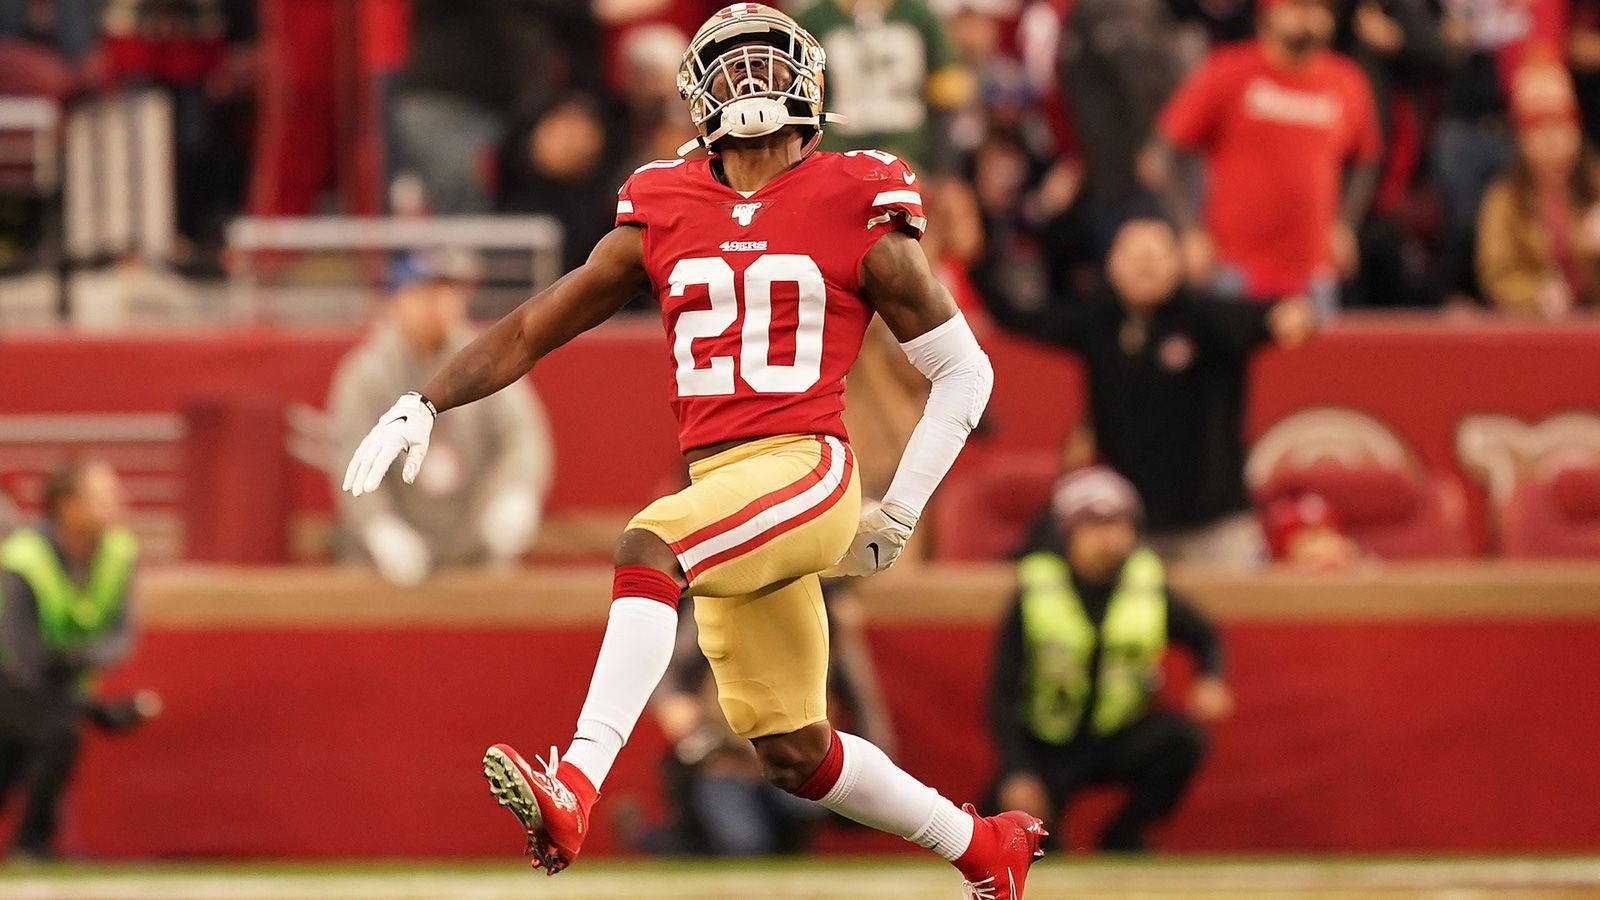 
                <strong>San Francisco 49ers: Jimmie Ward</strong><br>
                Position: SafetyIm Team seit: 7 Saisons
              